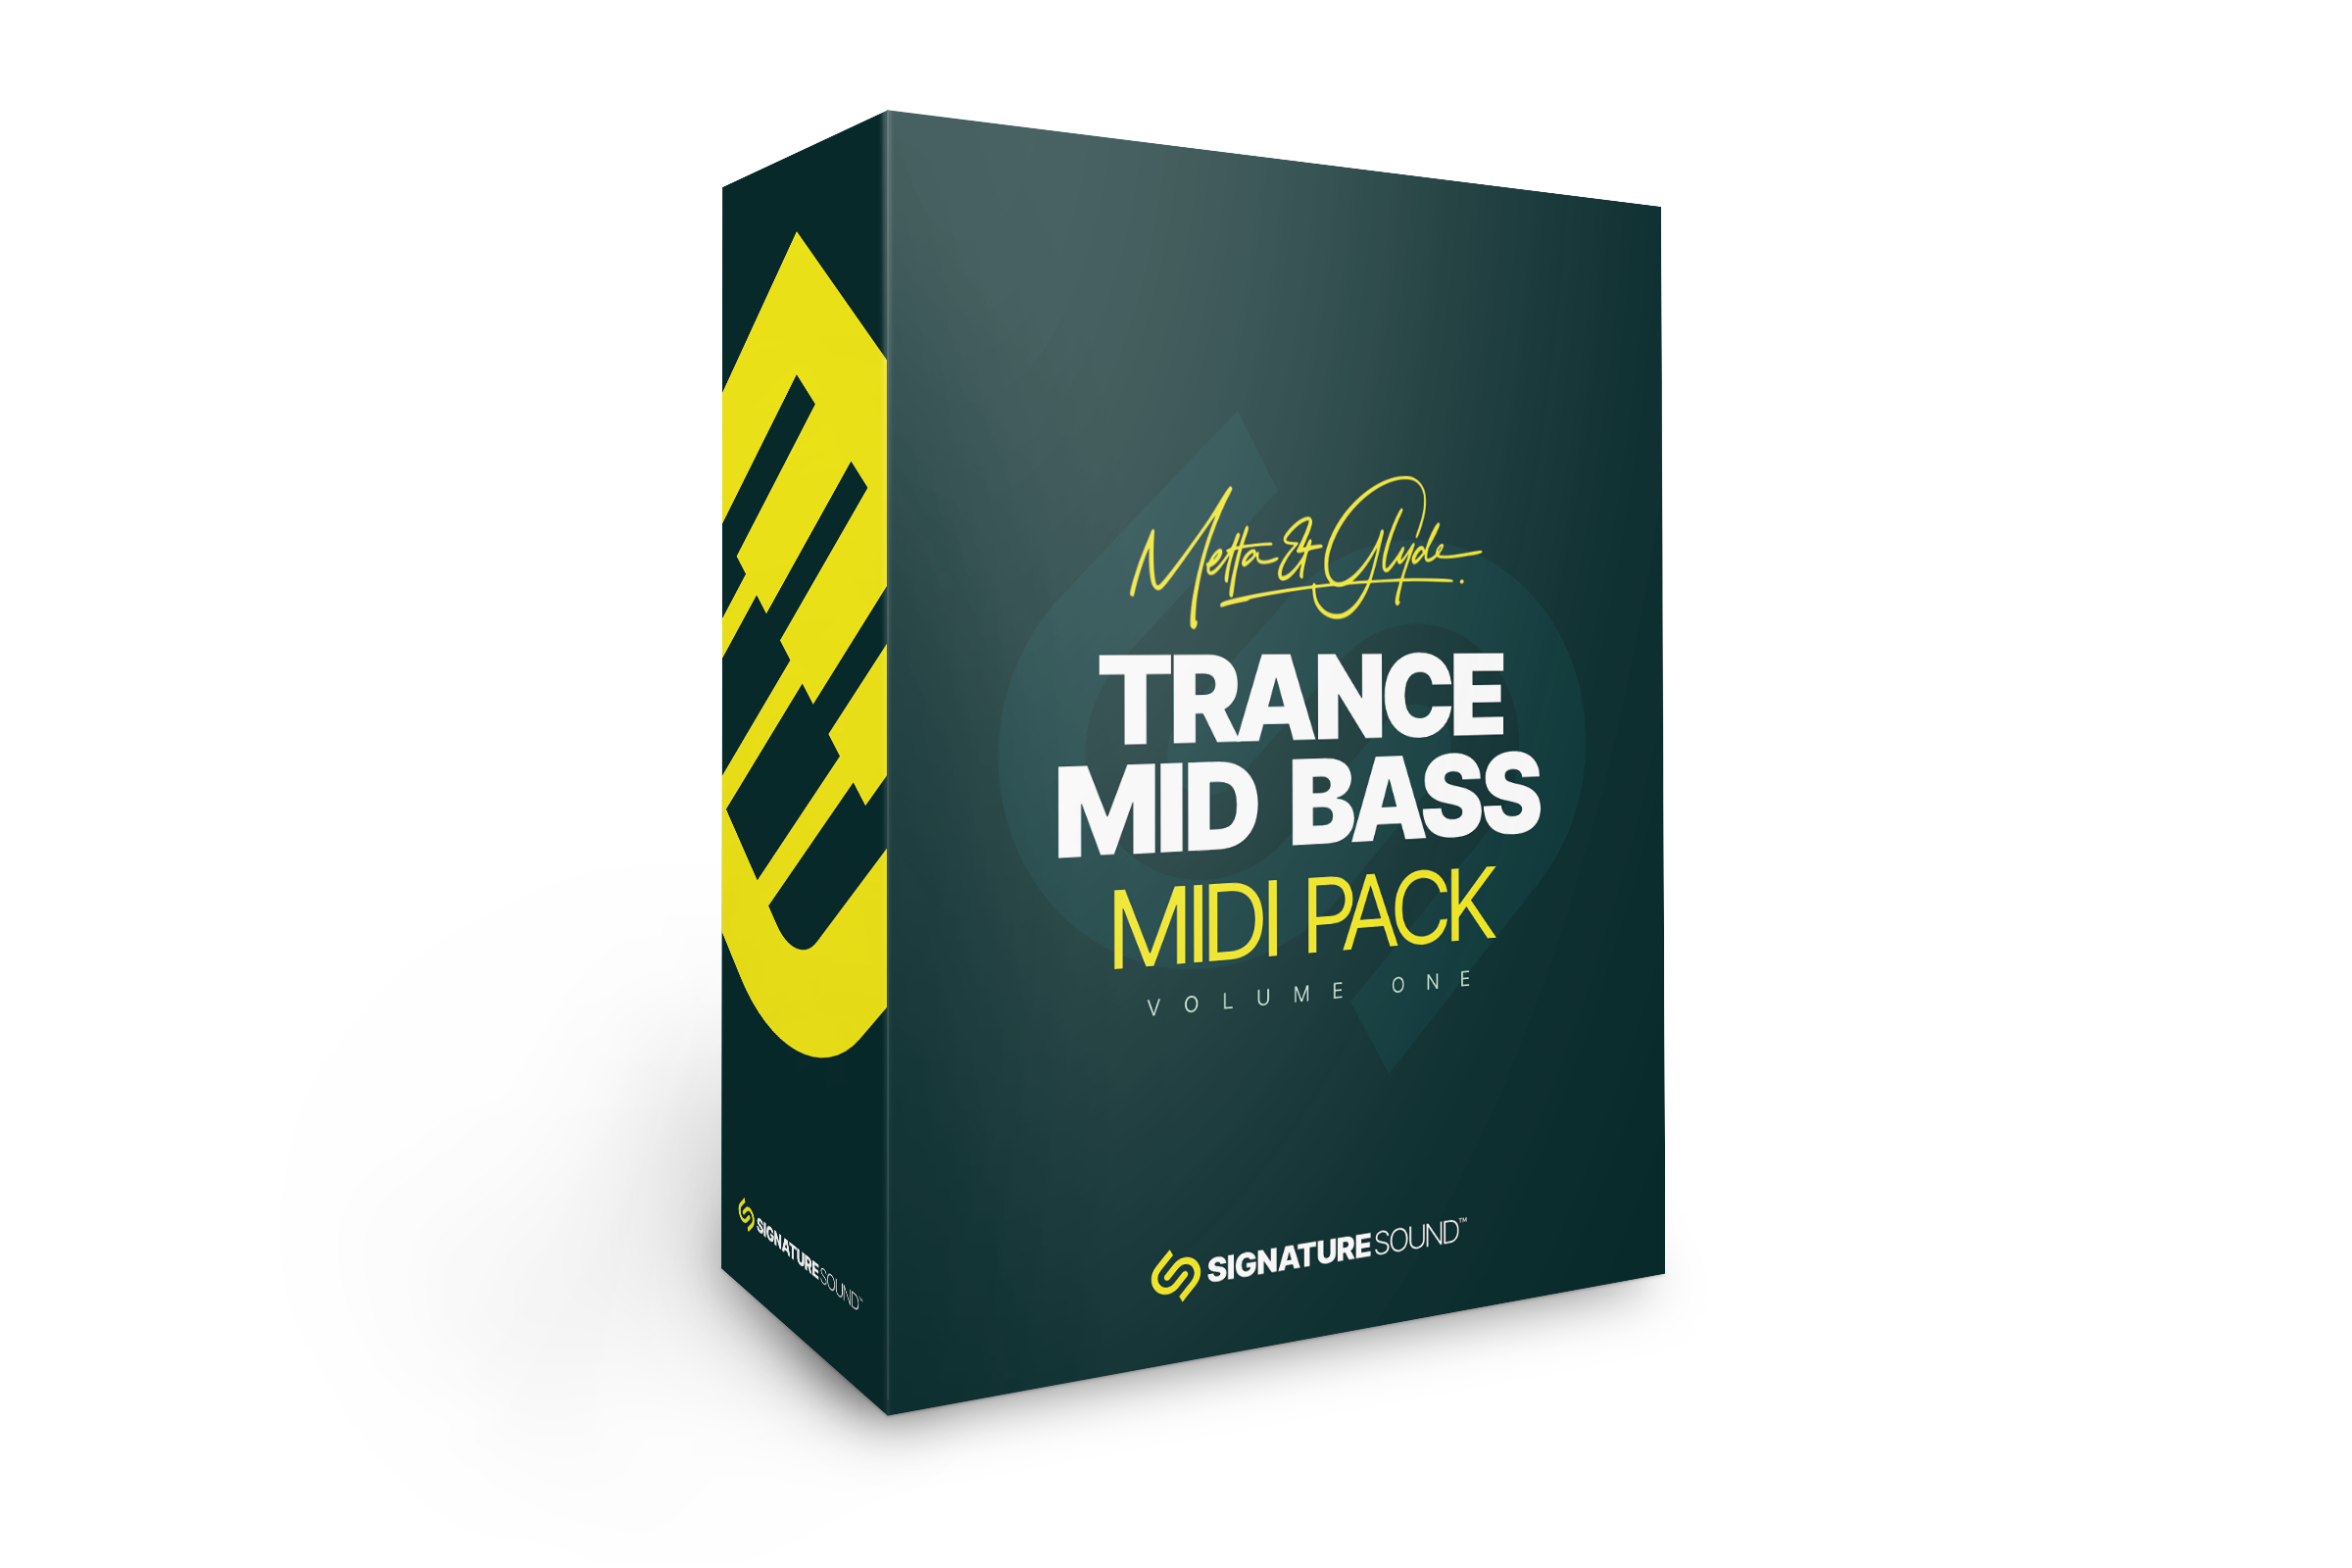 Metta and Glyde Trance Mid Bass [Midi Pack] Volume One